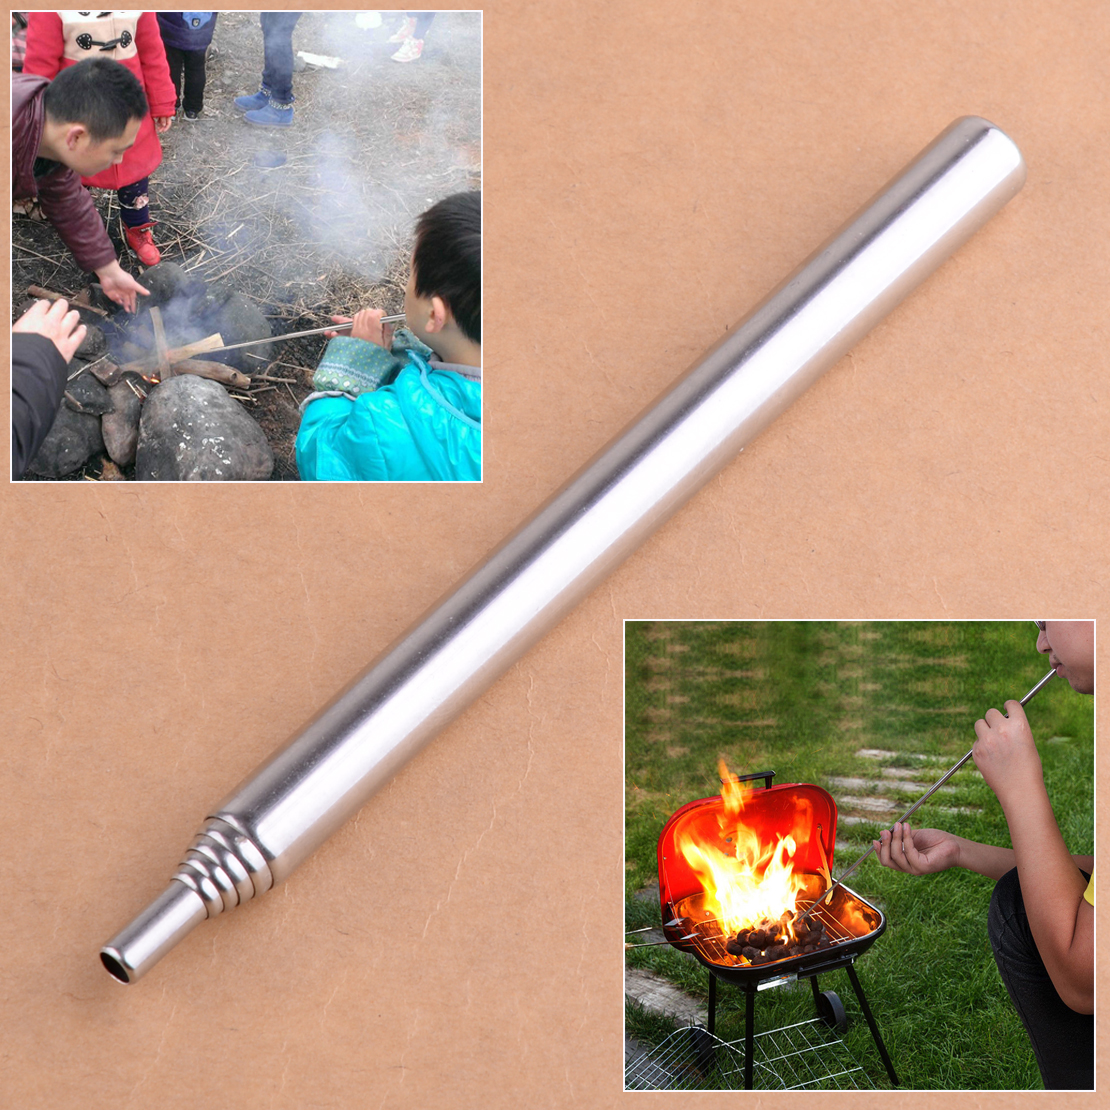 Stainless Collapsible-Pocket Bellows Make-Fire Tool By Blasting-Air Camping